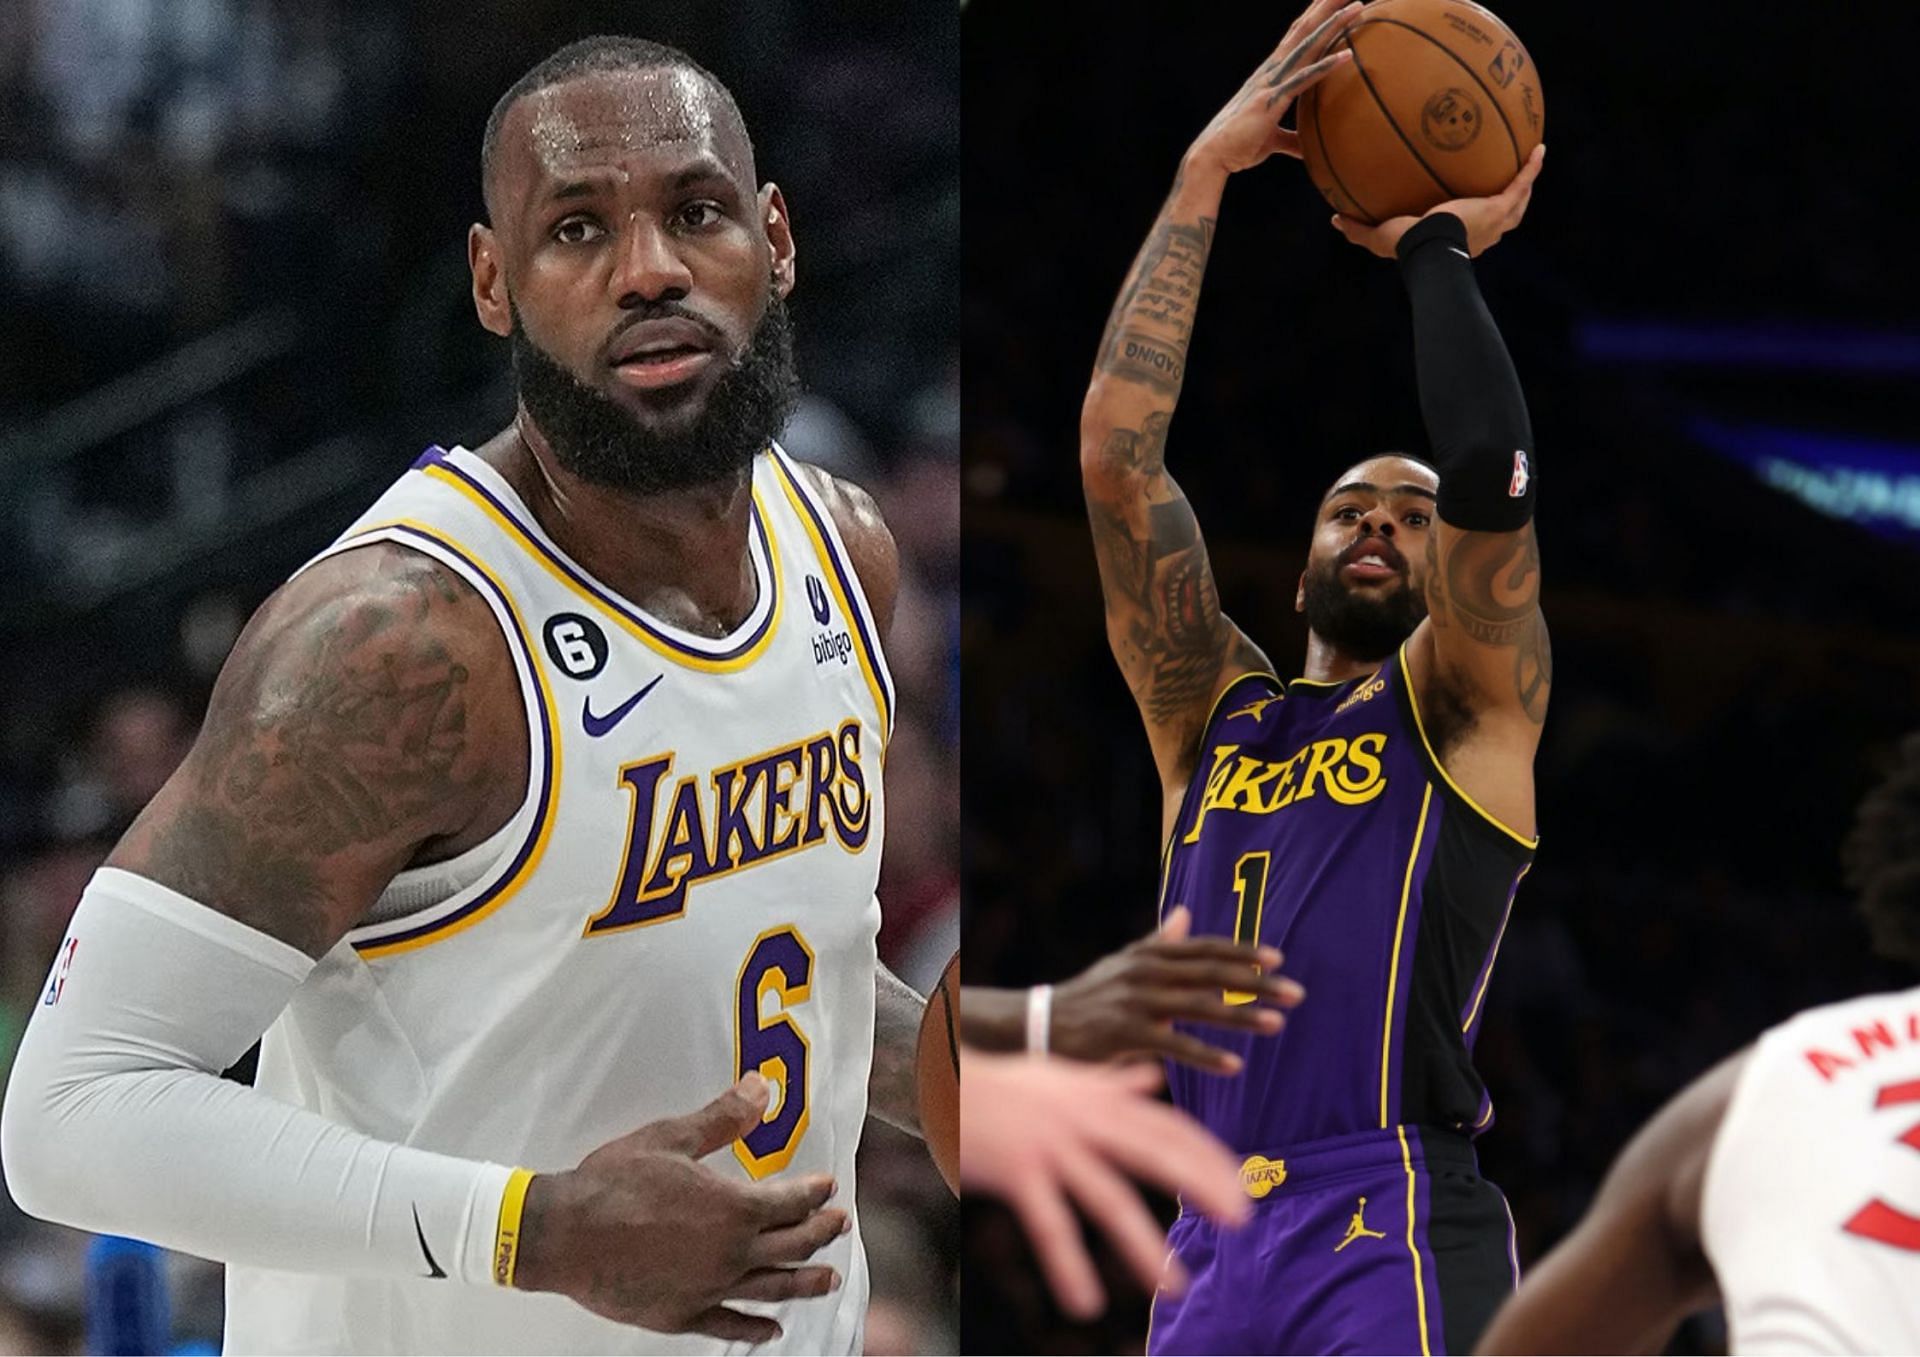 NBA injury report headlined by status of LeBron James and D